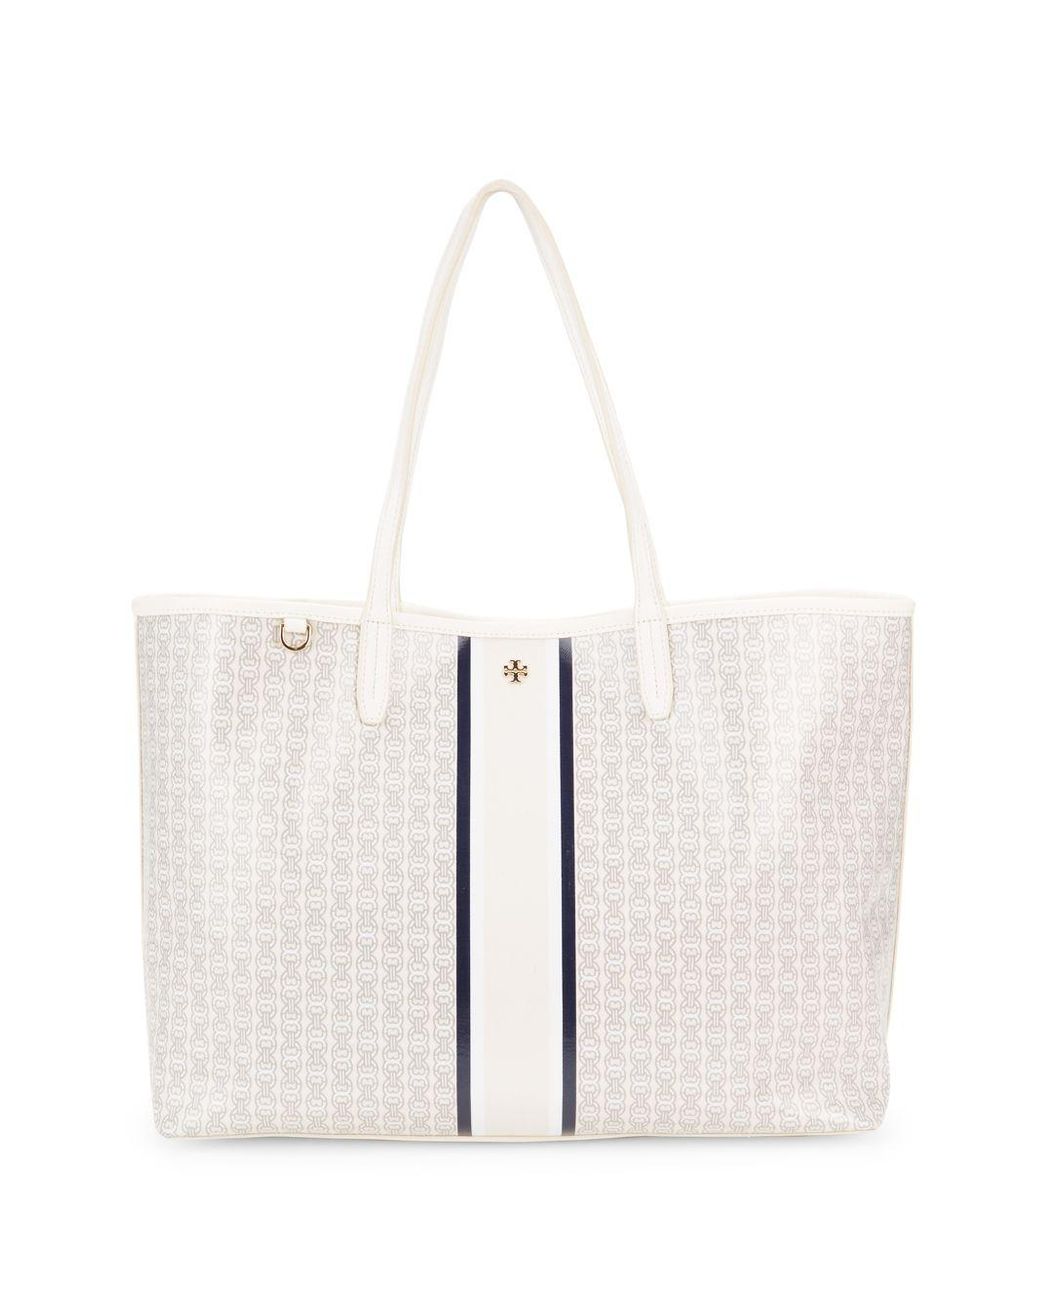 Tory Burch Women's Gemini Link Canvas Small Tote, New Ivory Gemini Link,  Off White, Print, One Size 53304-068 - AllGlitters